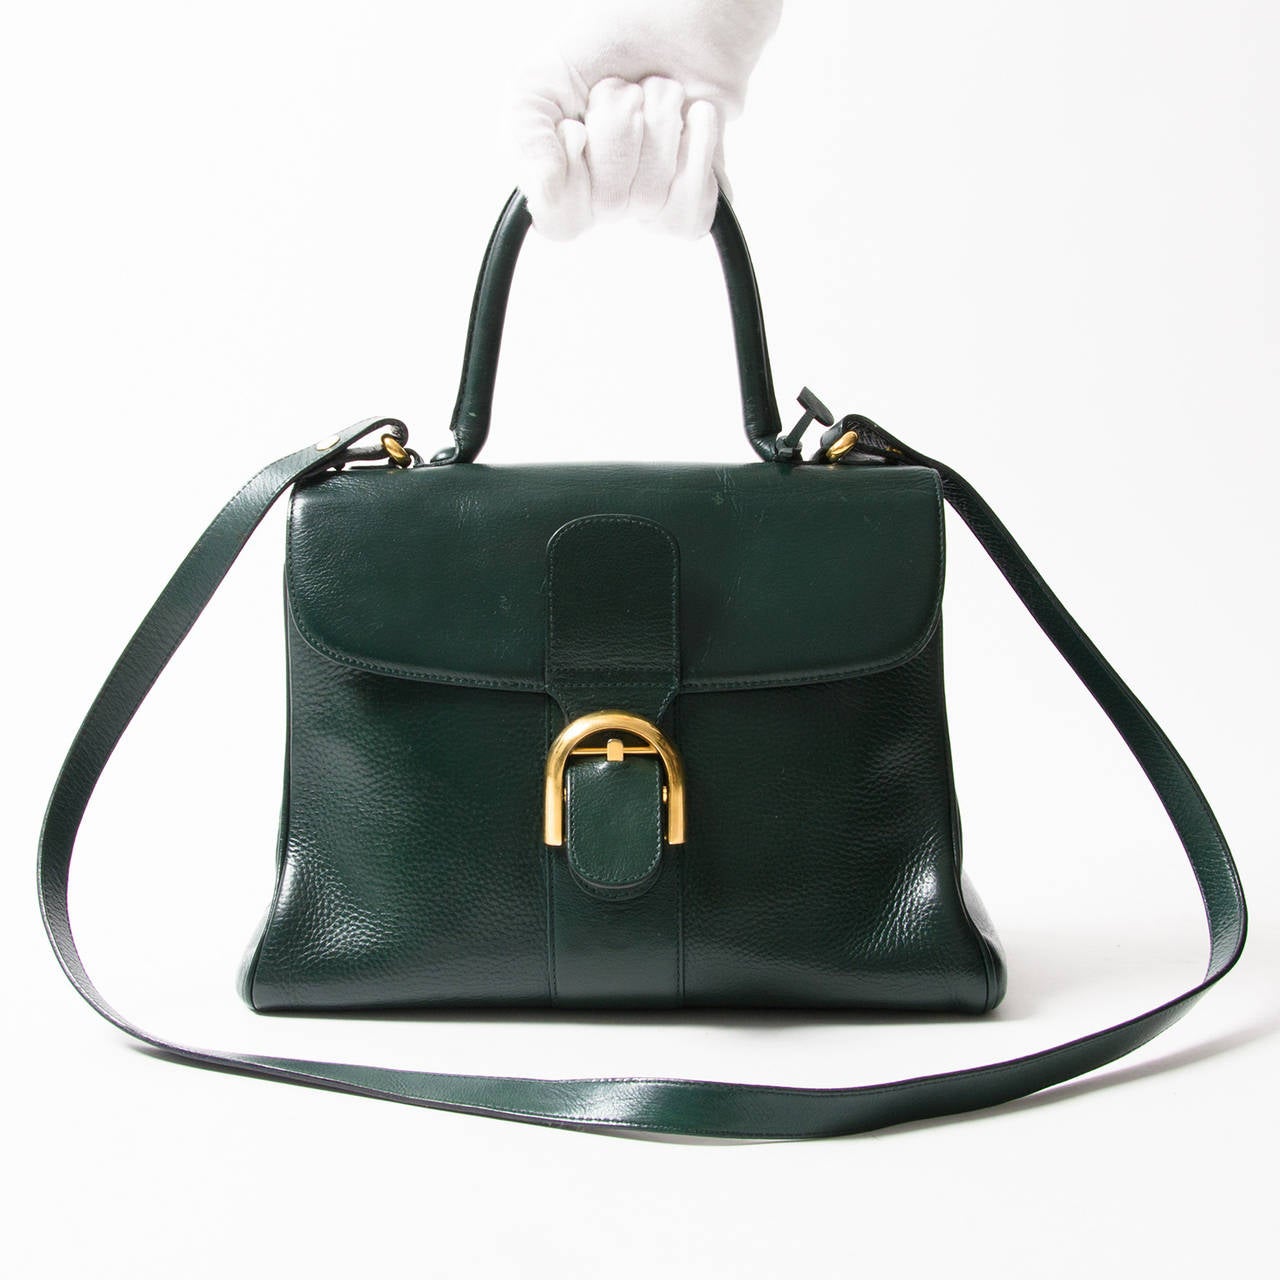 Delvaux dark green Brillant bag with gold hardware. Wear it with the shoulder strap for a more modern look. Iconic Delvaux D appliqué on top handle. Four small studs are applied on the bottom to protect this valuable bag. Delvaux logo is situated